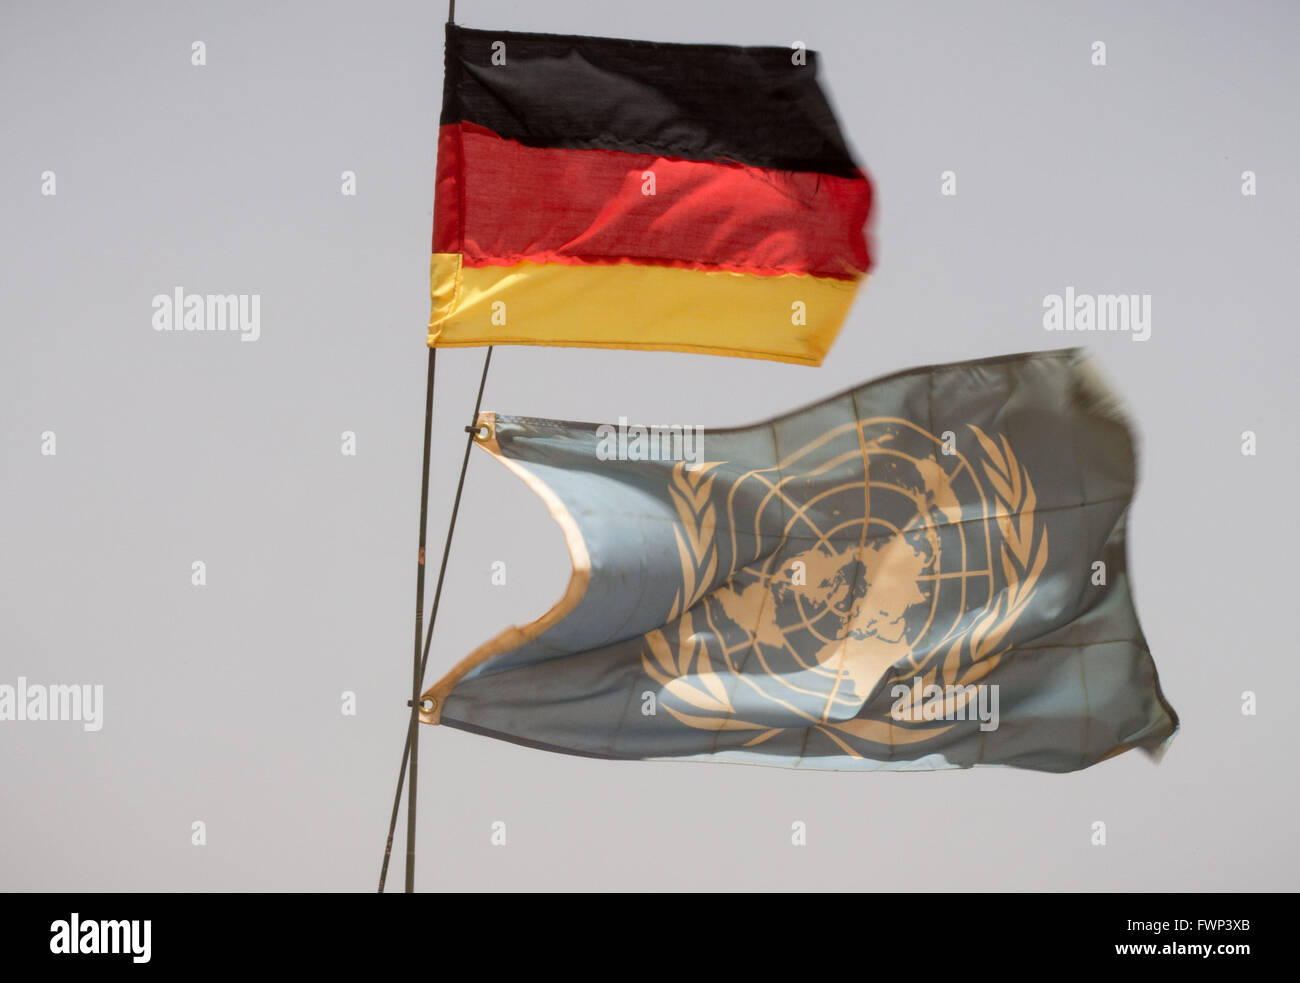 A German national flag and a United Nations (UN) flag have been mounted to a vehicle of the German armed forces (Bundeswehr) that is part of the UN mission MINUSMA in Gao, Mali, 05 April 2016. Photo: MICHAEL KAPPELER/dpa Stock Photo